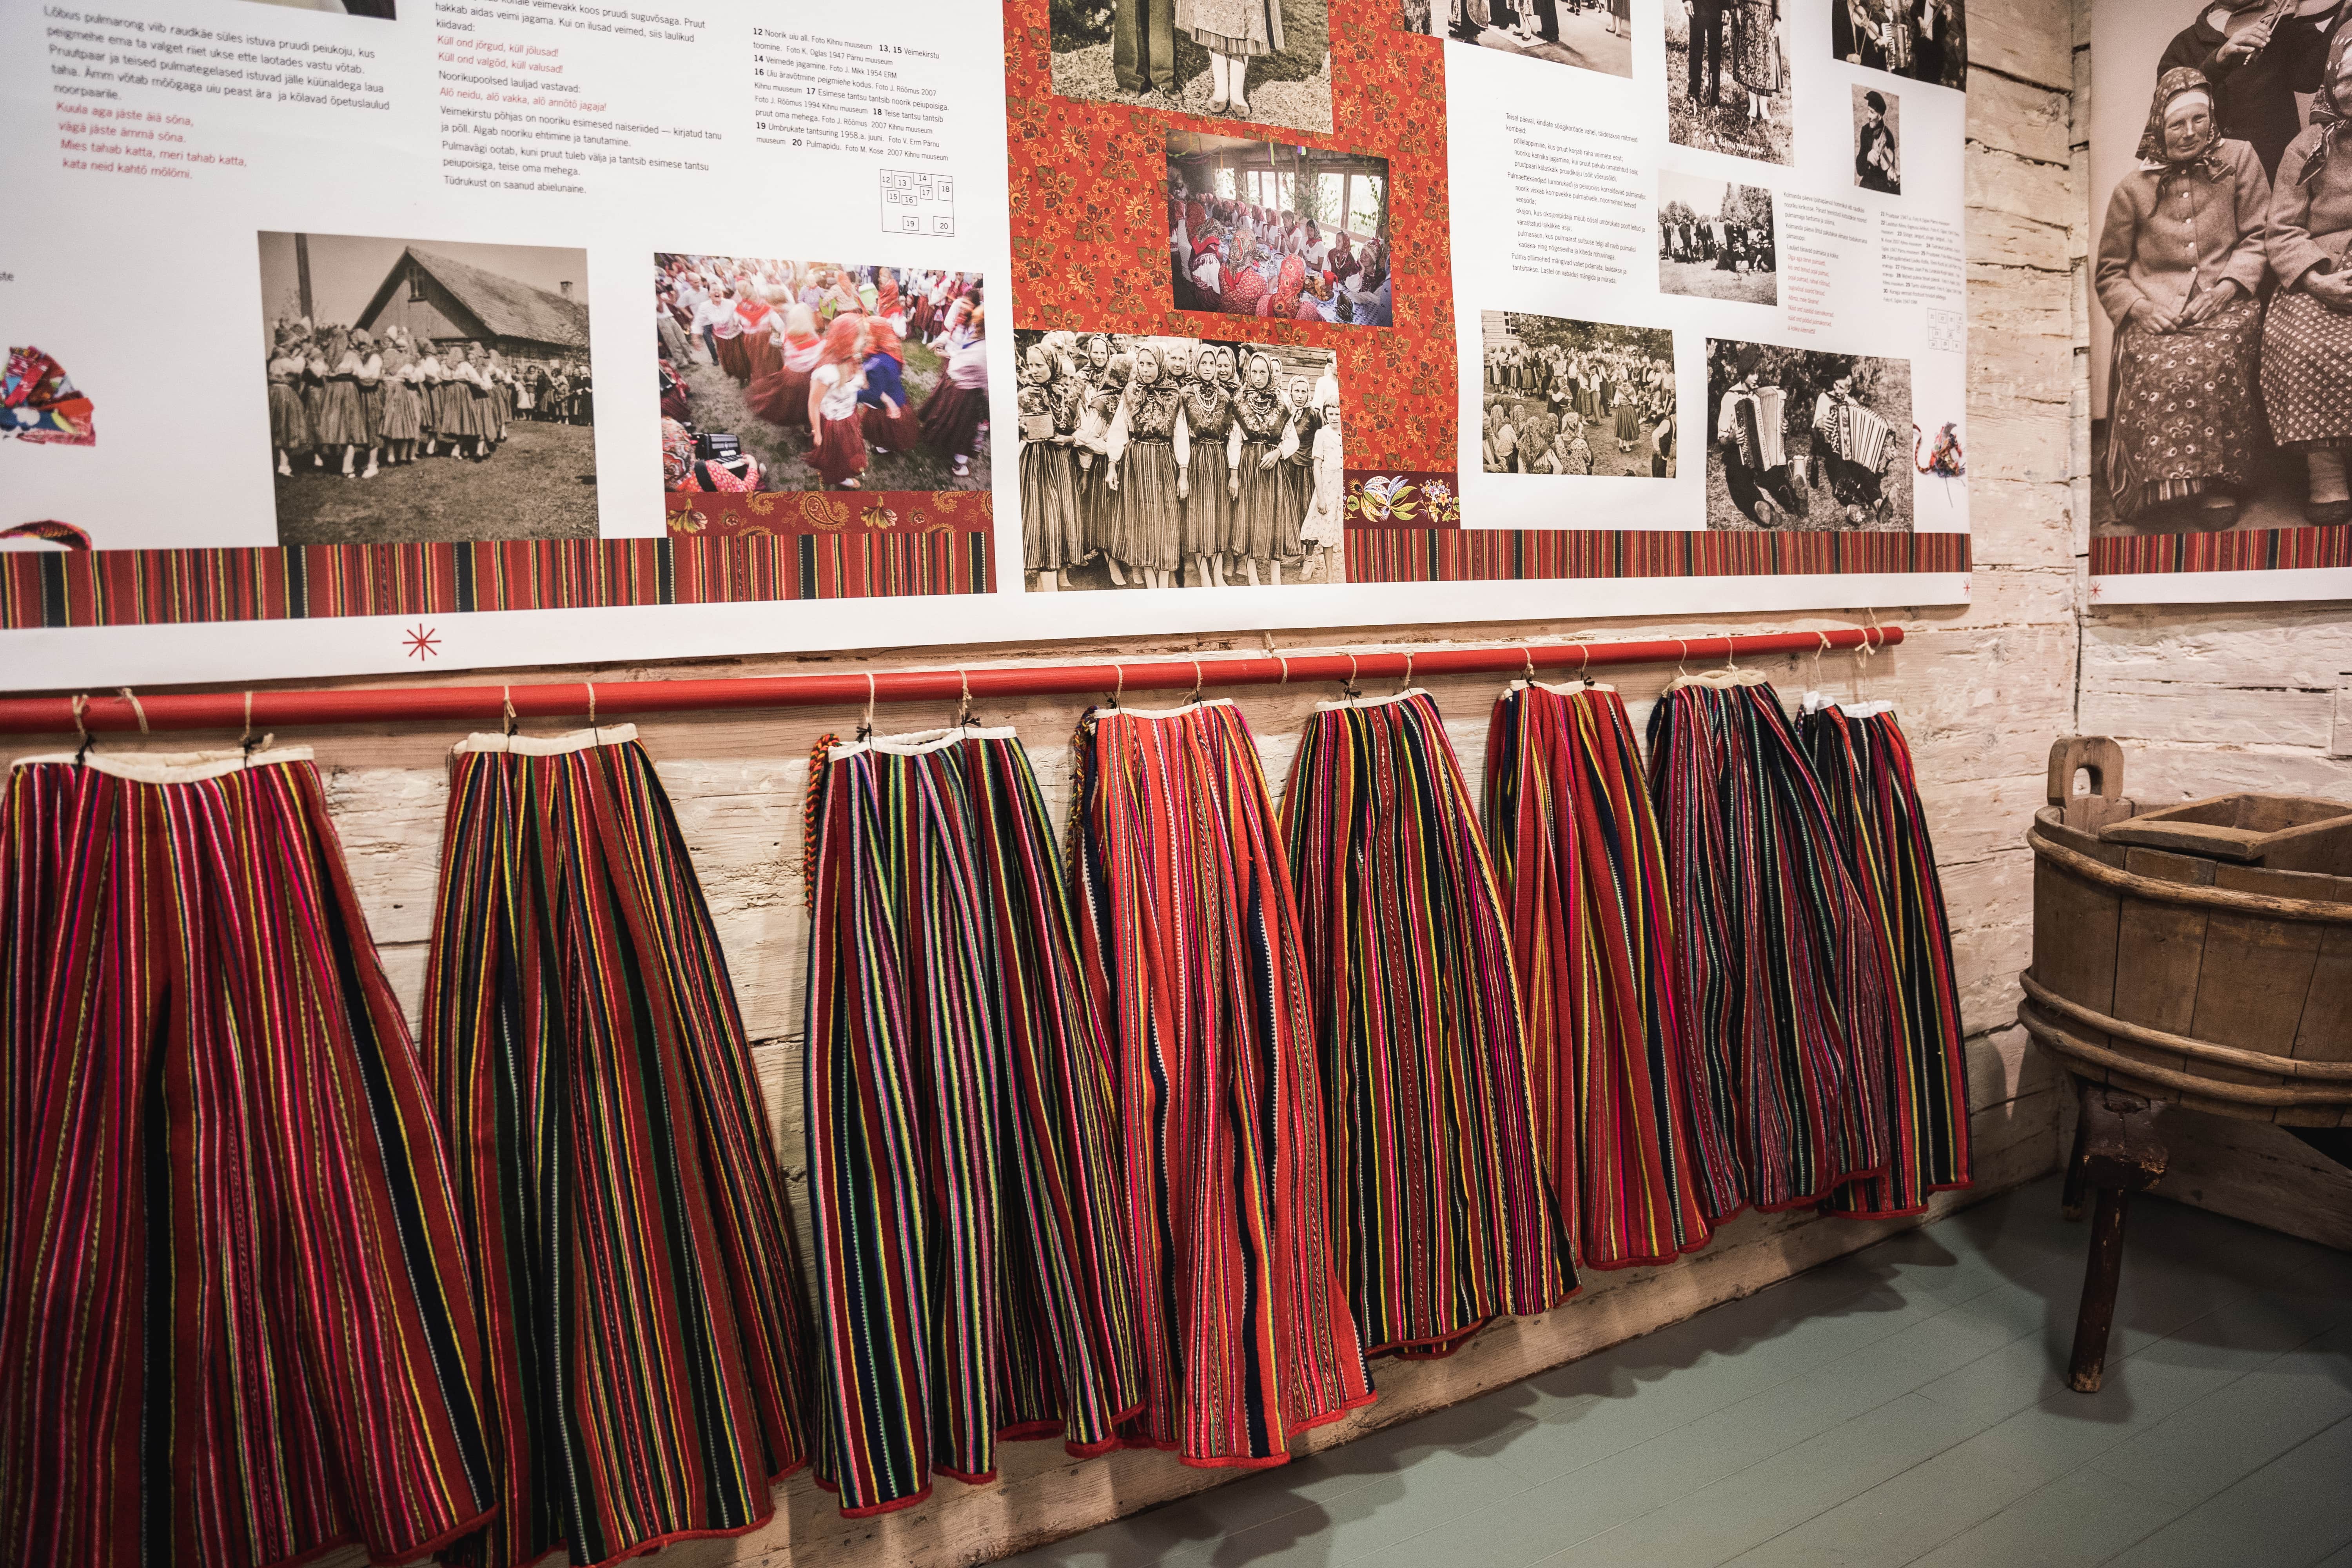 Kihnu skirts on display in the local museum